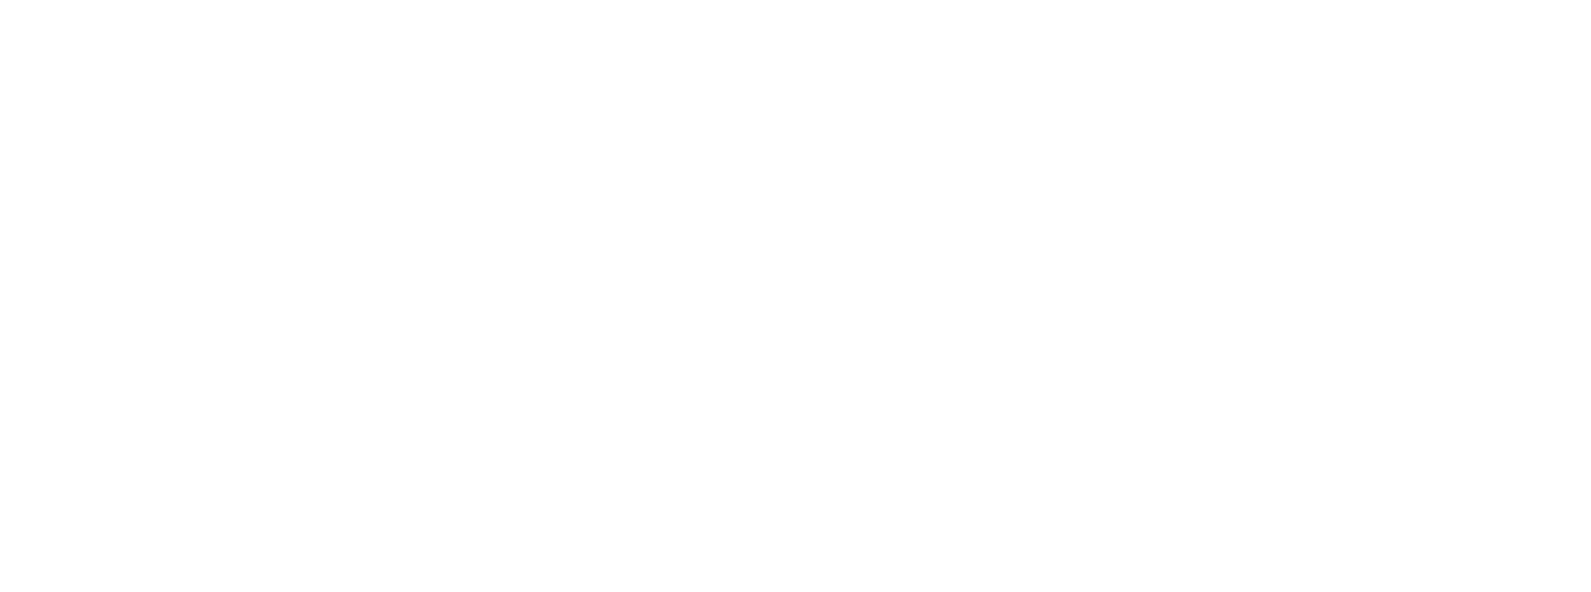 The Security Group